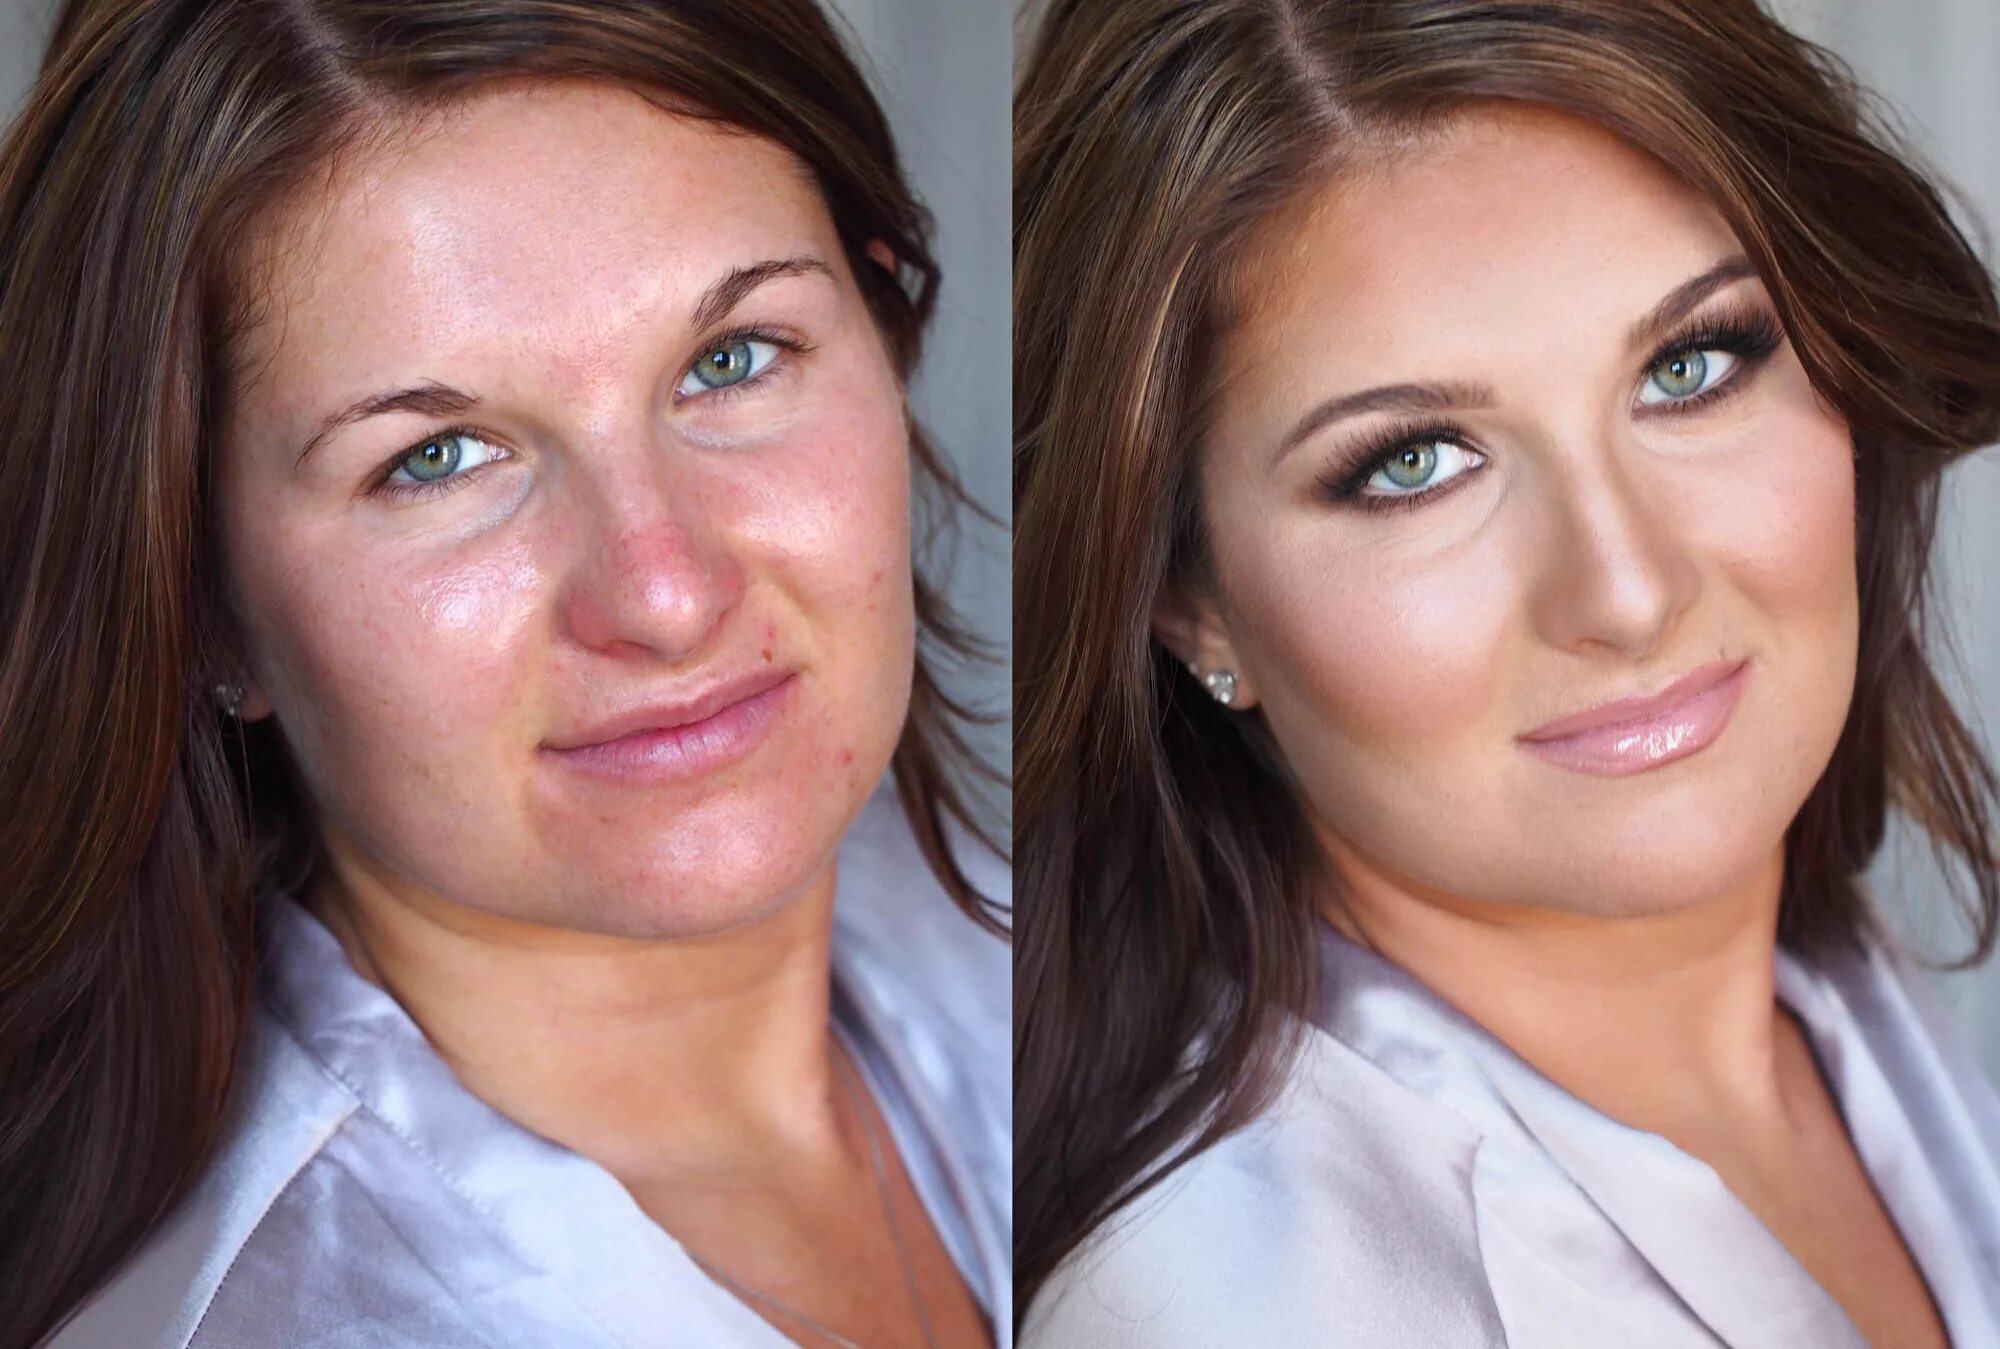 Photos before after. Before after. Before after картинки. Beauty before after. Alana before after.